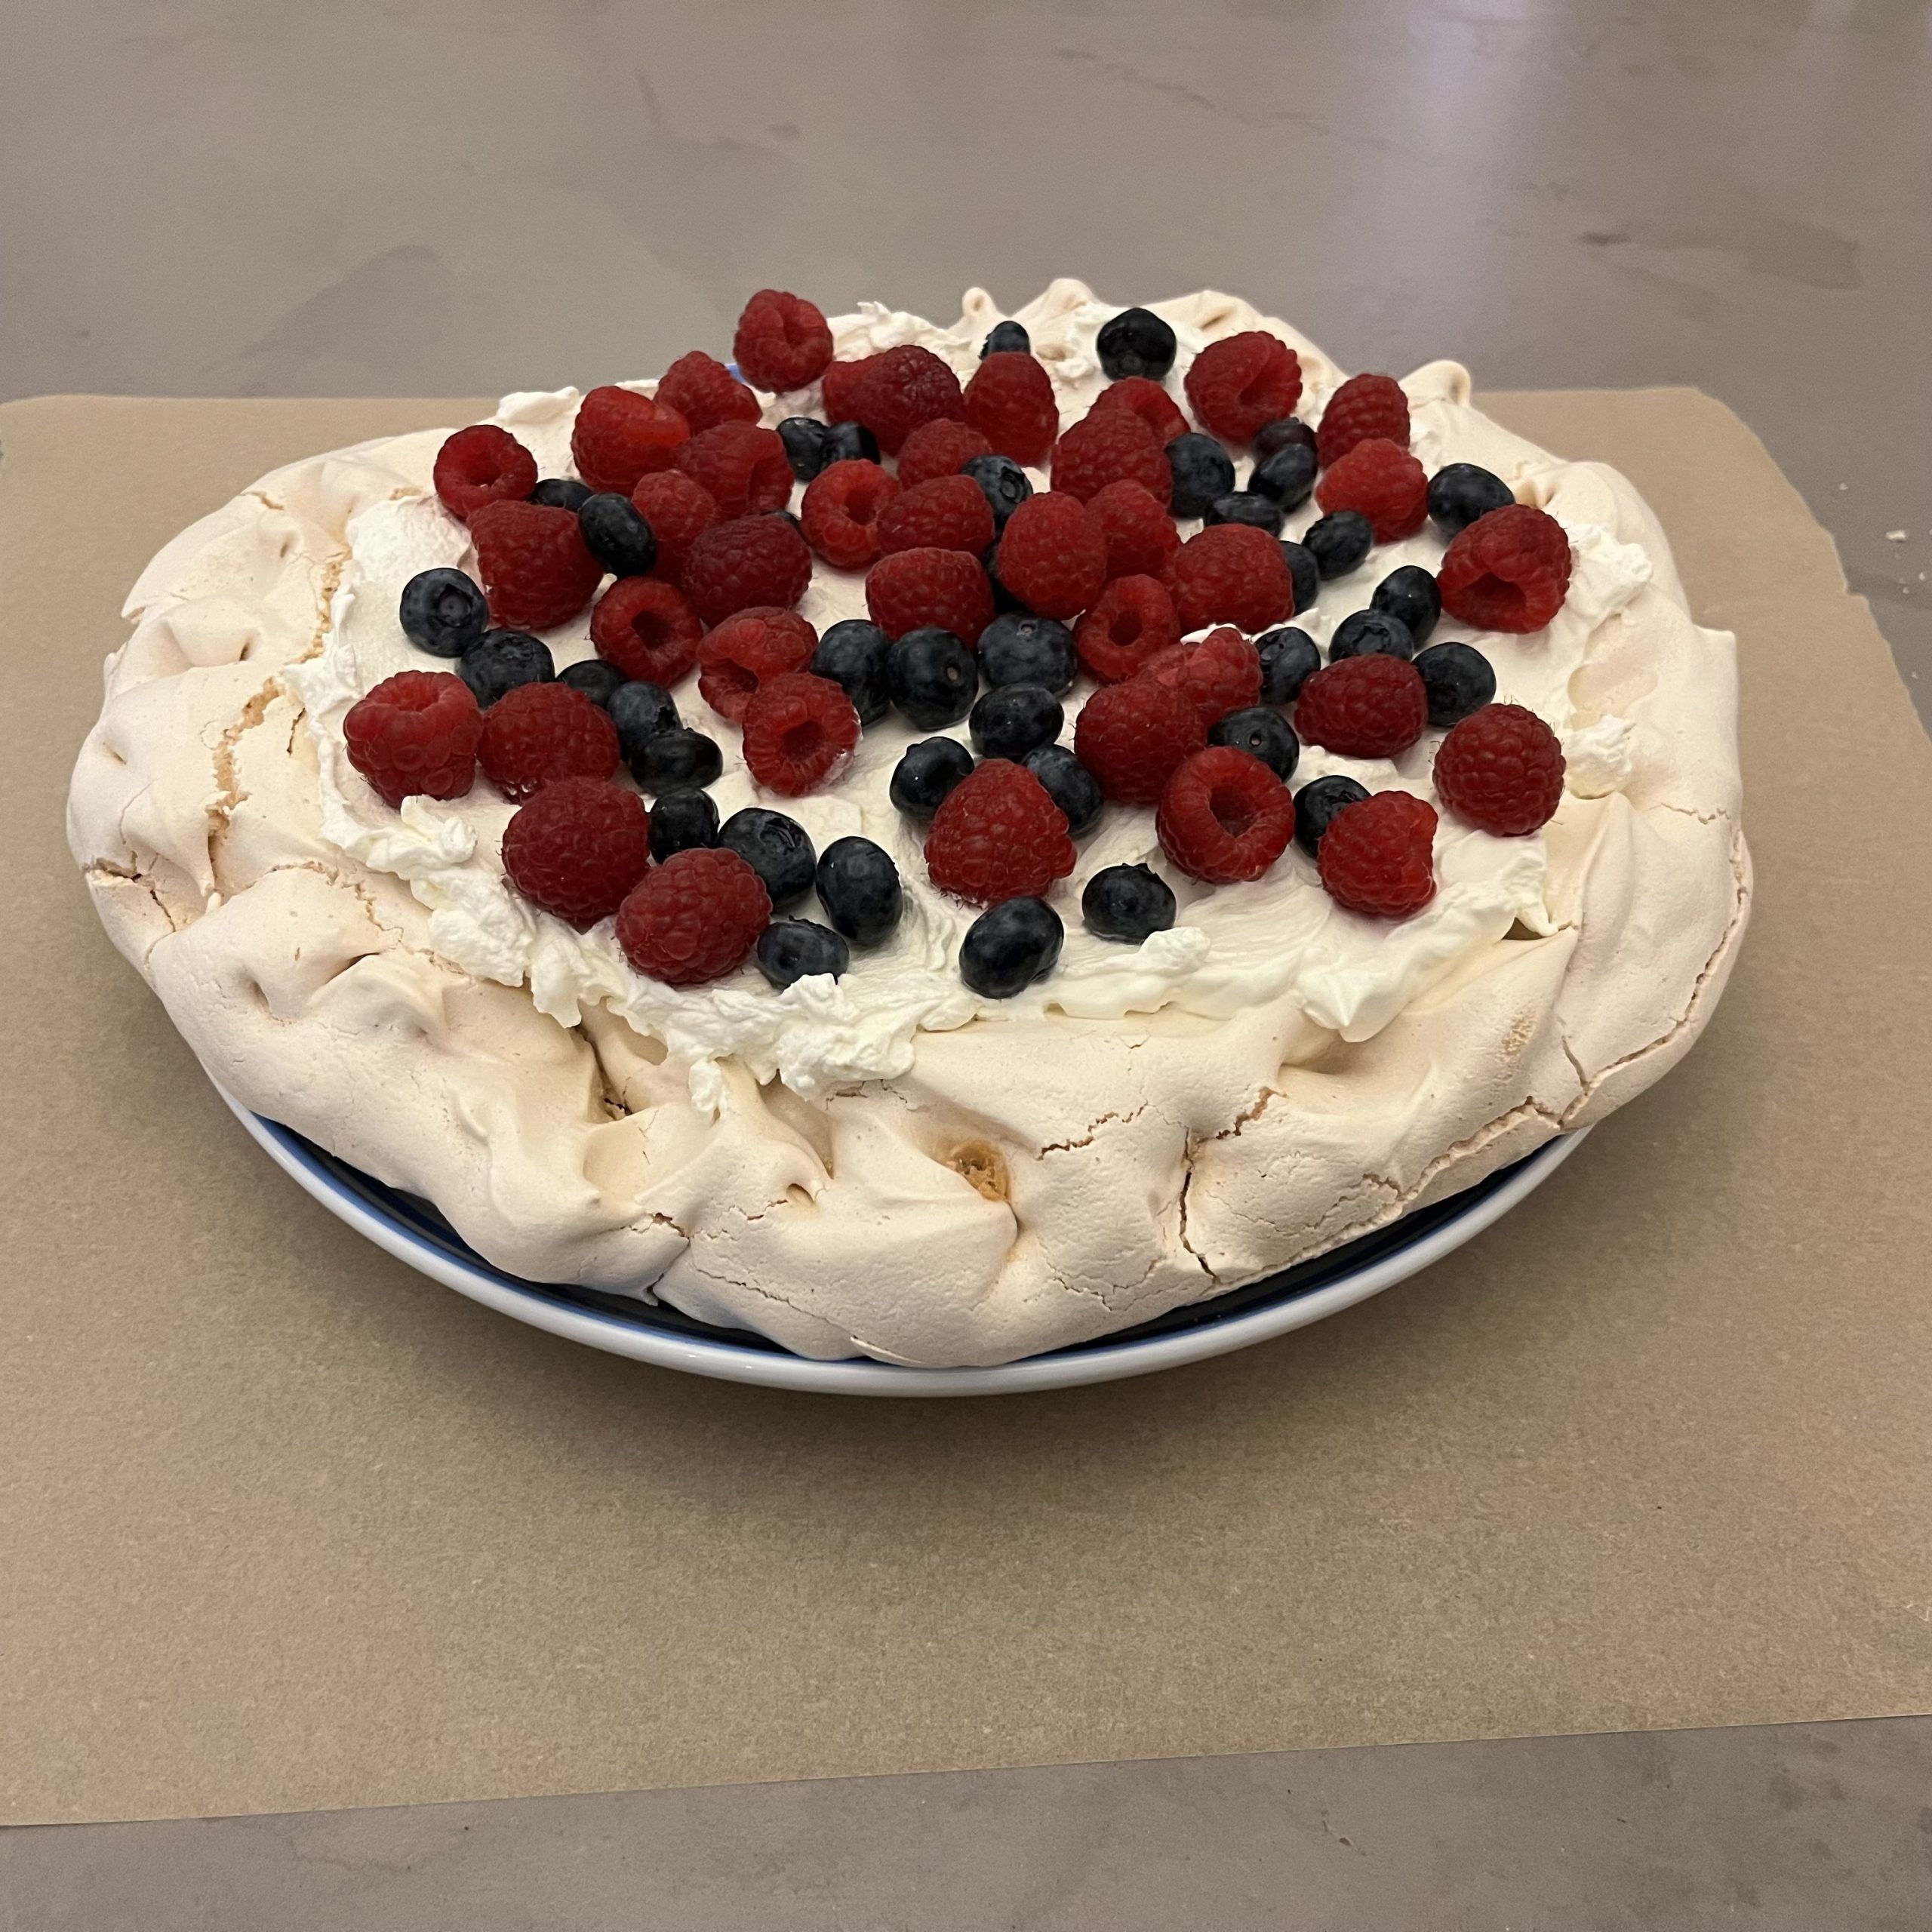 Delicious pavlova, cooked by my youngest son as part of his Duke of Edinburgh course.